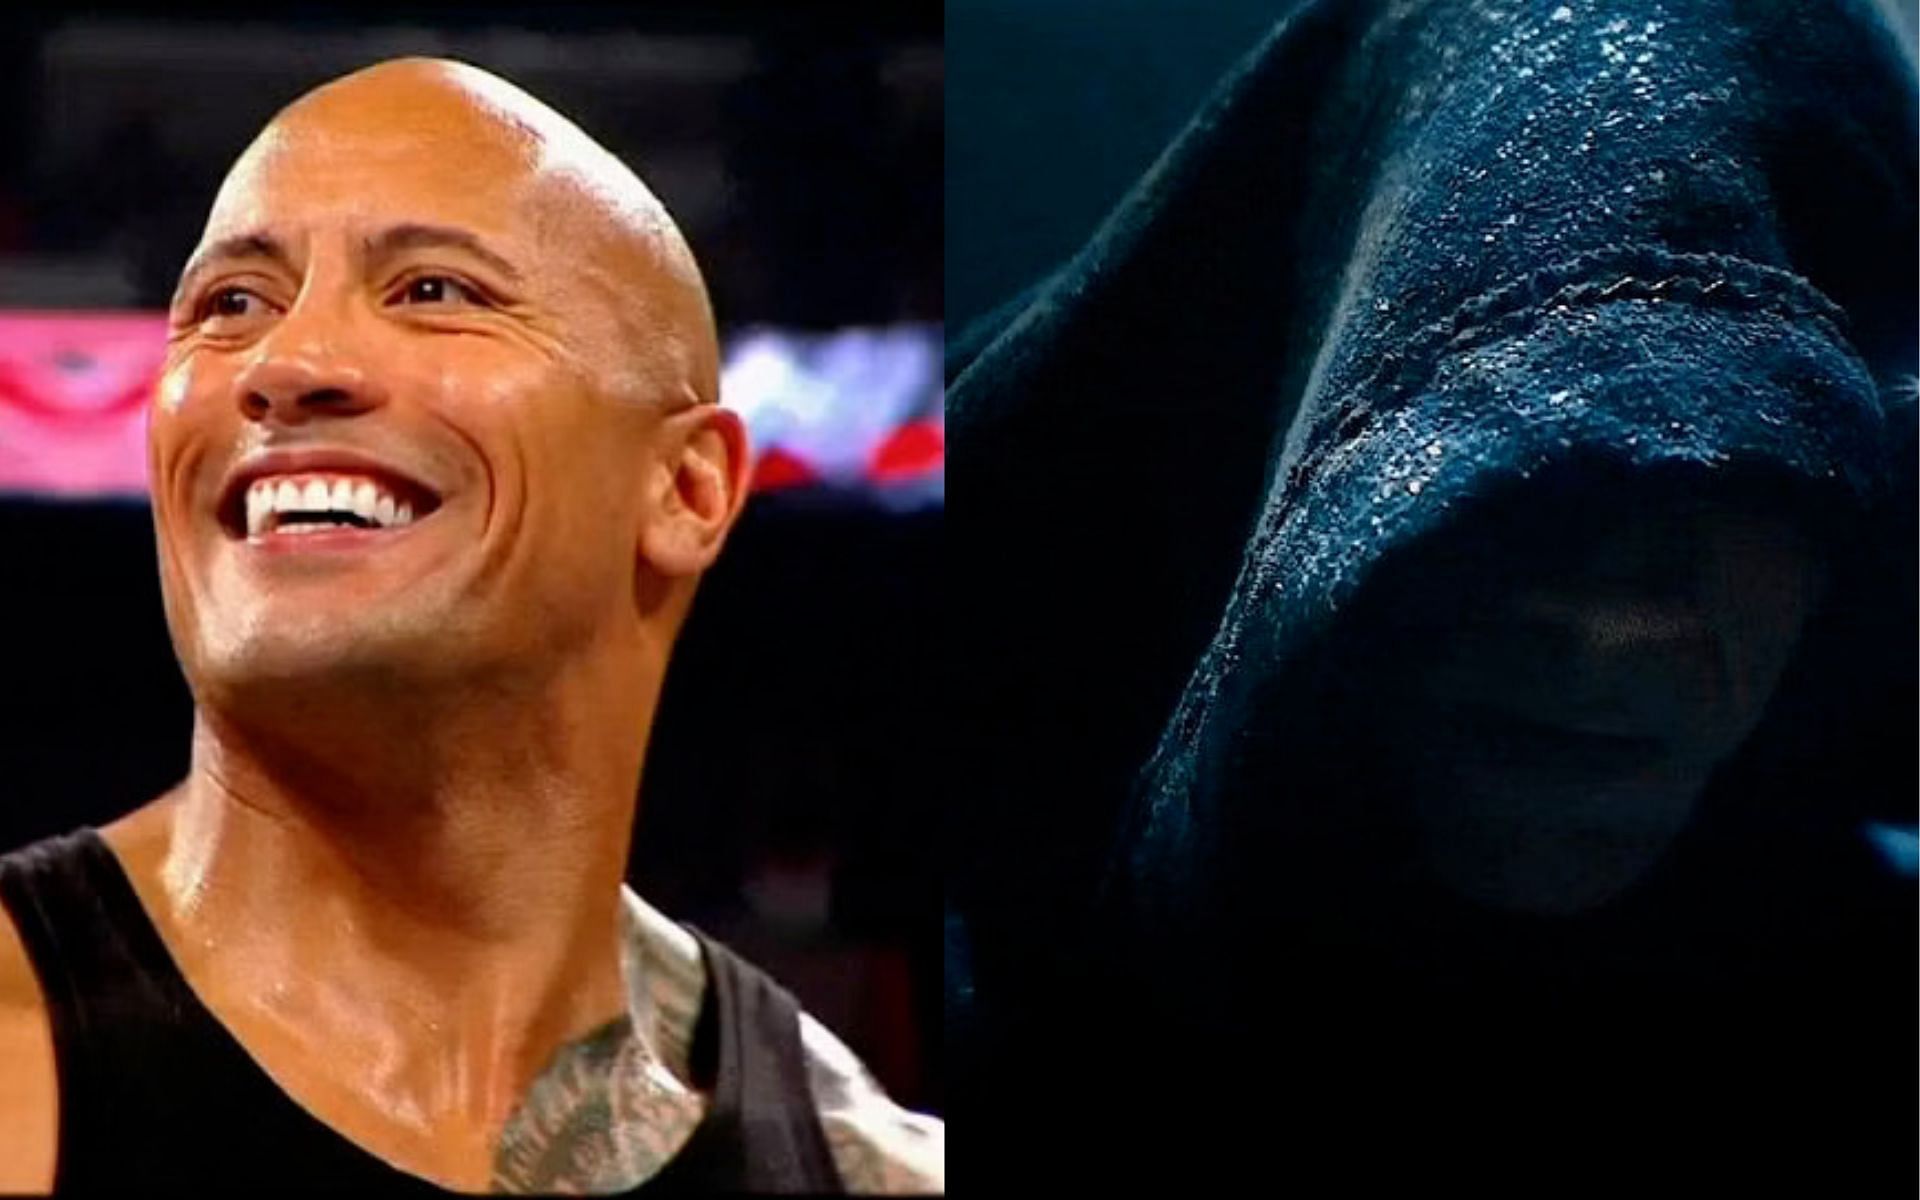 Dwayne Johnson was announced for the role in 2014